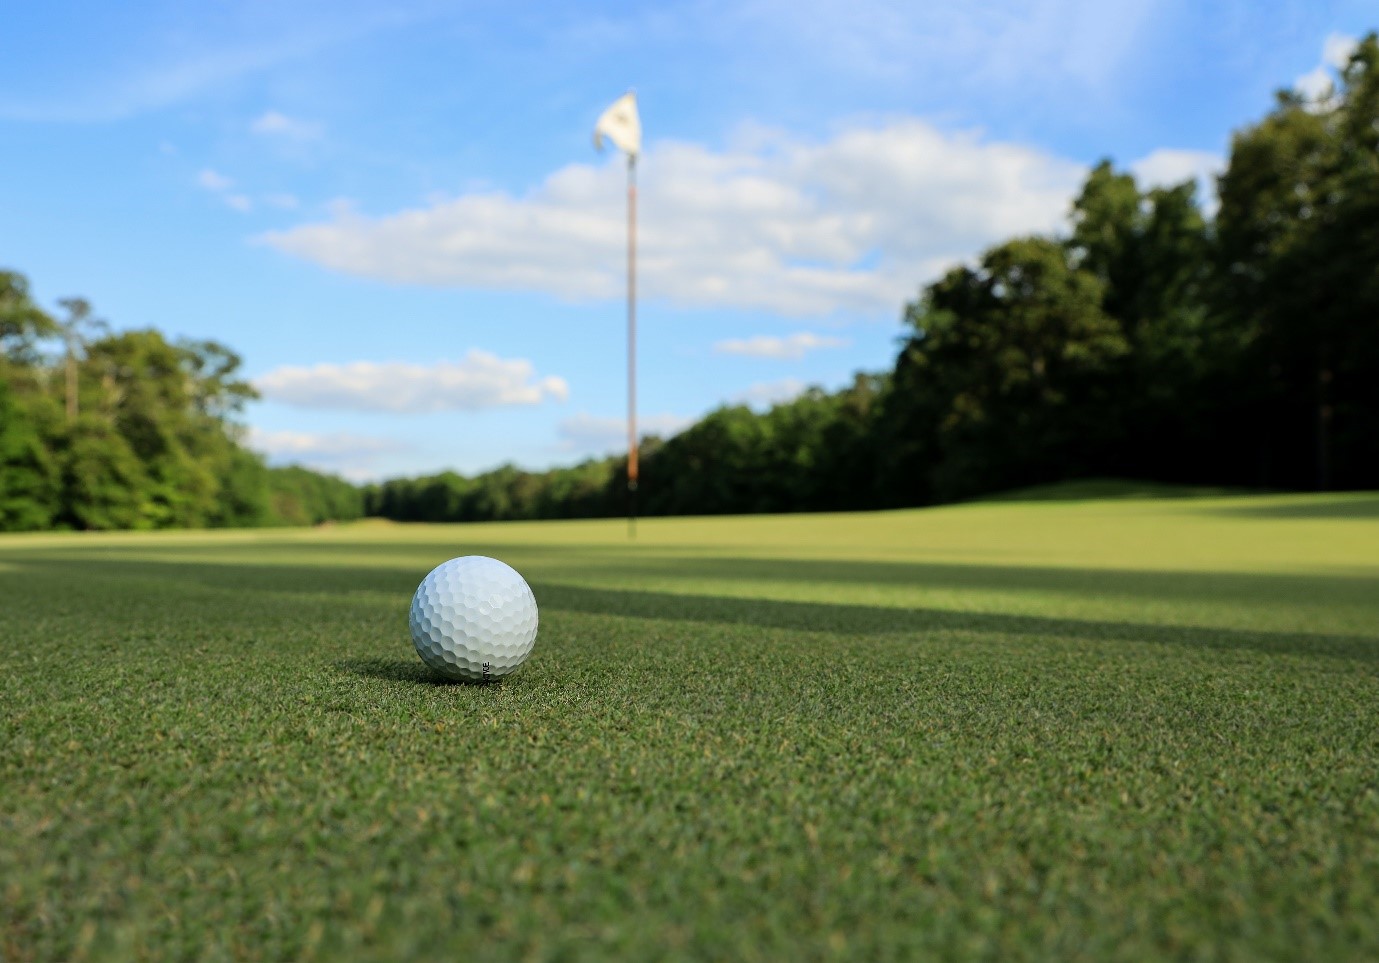 Have a hit of golf at the Barwon Valley Golf Club!